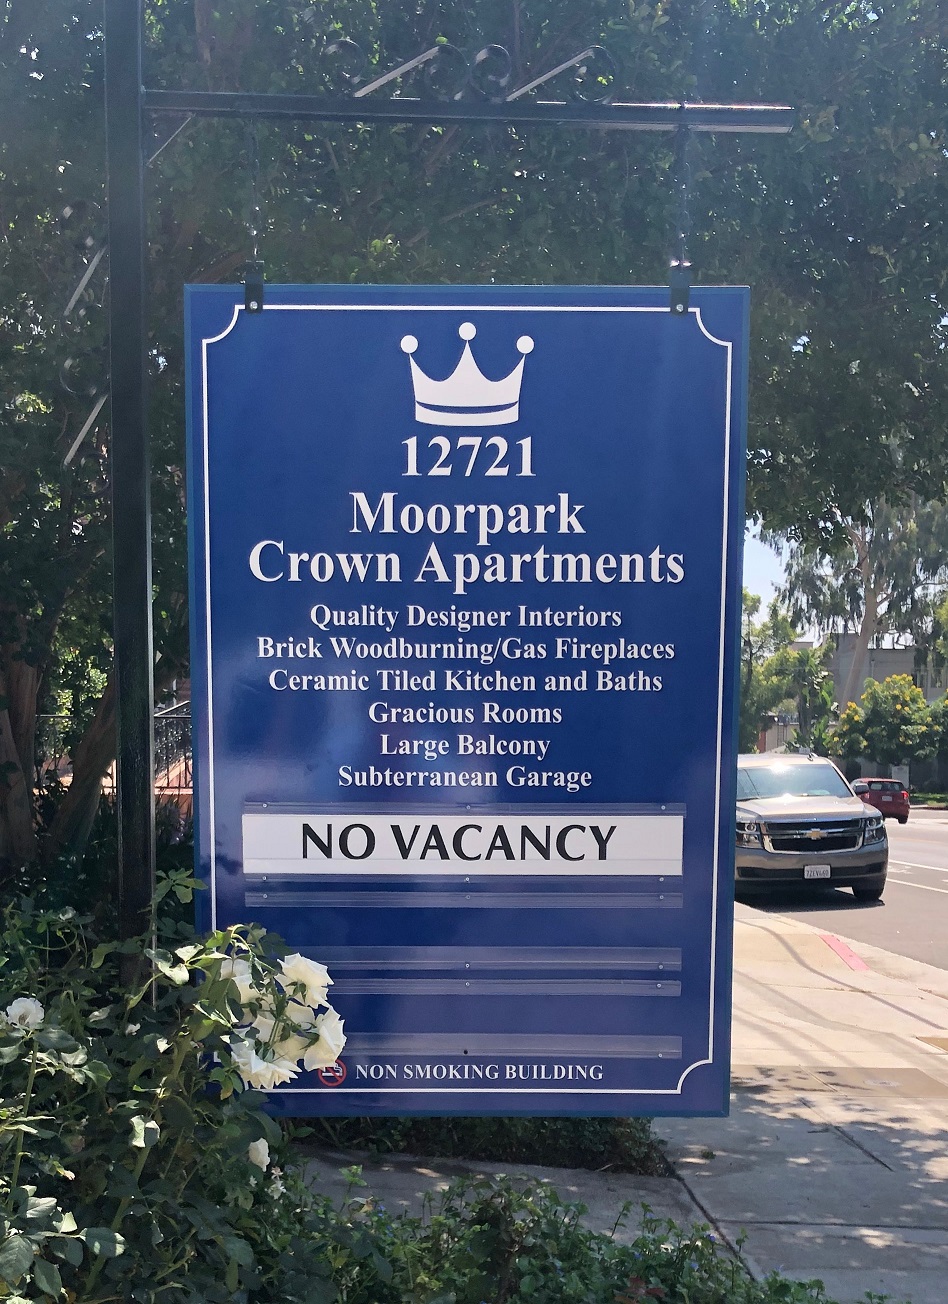 You are currently viewing Real Estate Signage for Moorpark Crown Apartments in Studio City